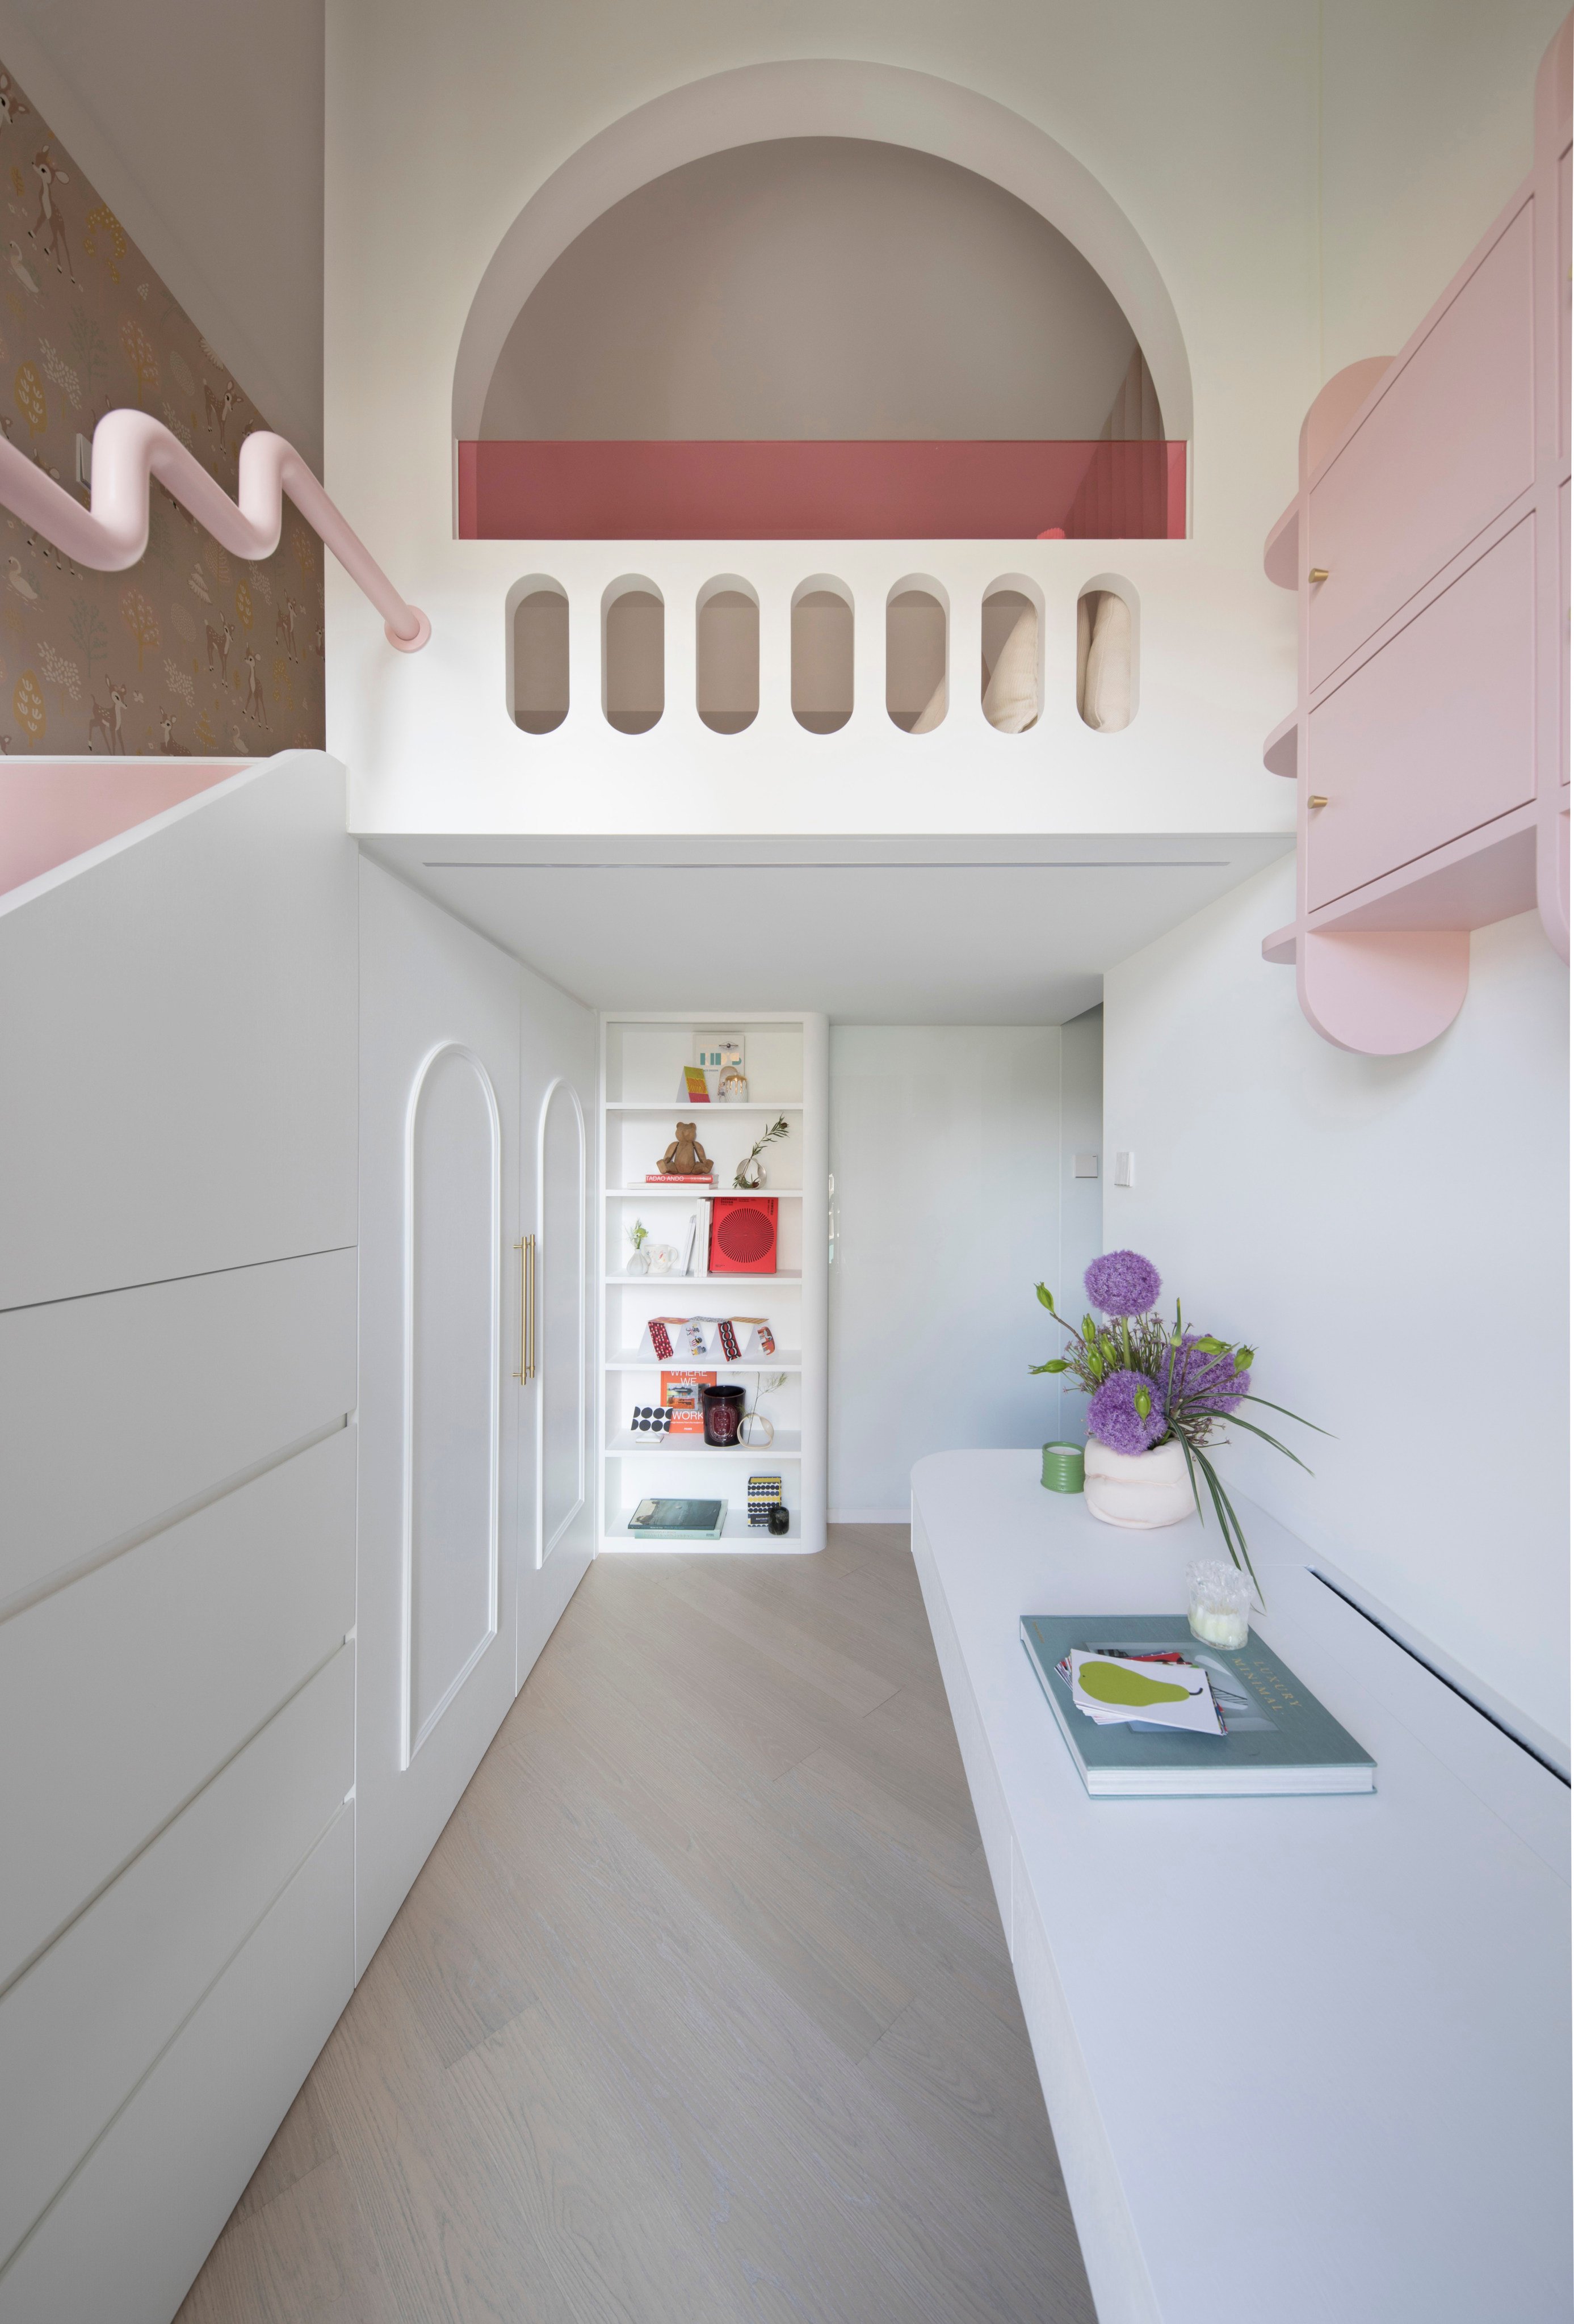 Polished and playful in equal measure, the Barbie Dreamhouse-inspired Ho Man Tin home of a young family shows it may be possible to please everyone. Above: detail from the bedroom of girls aged four and five. Photo: Addy Cheung